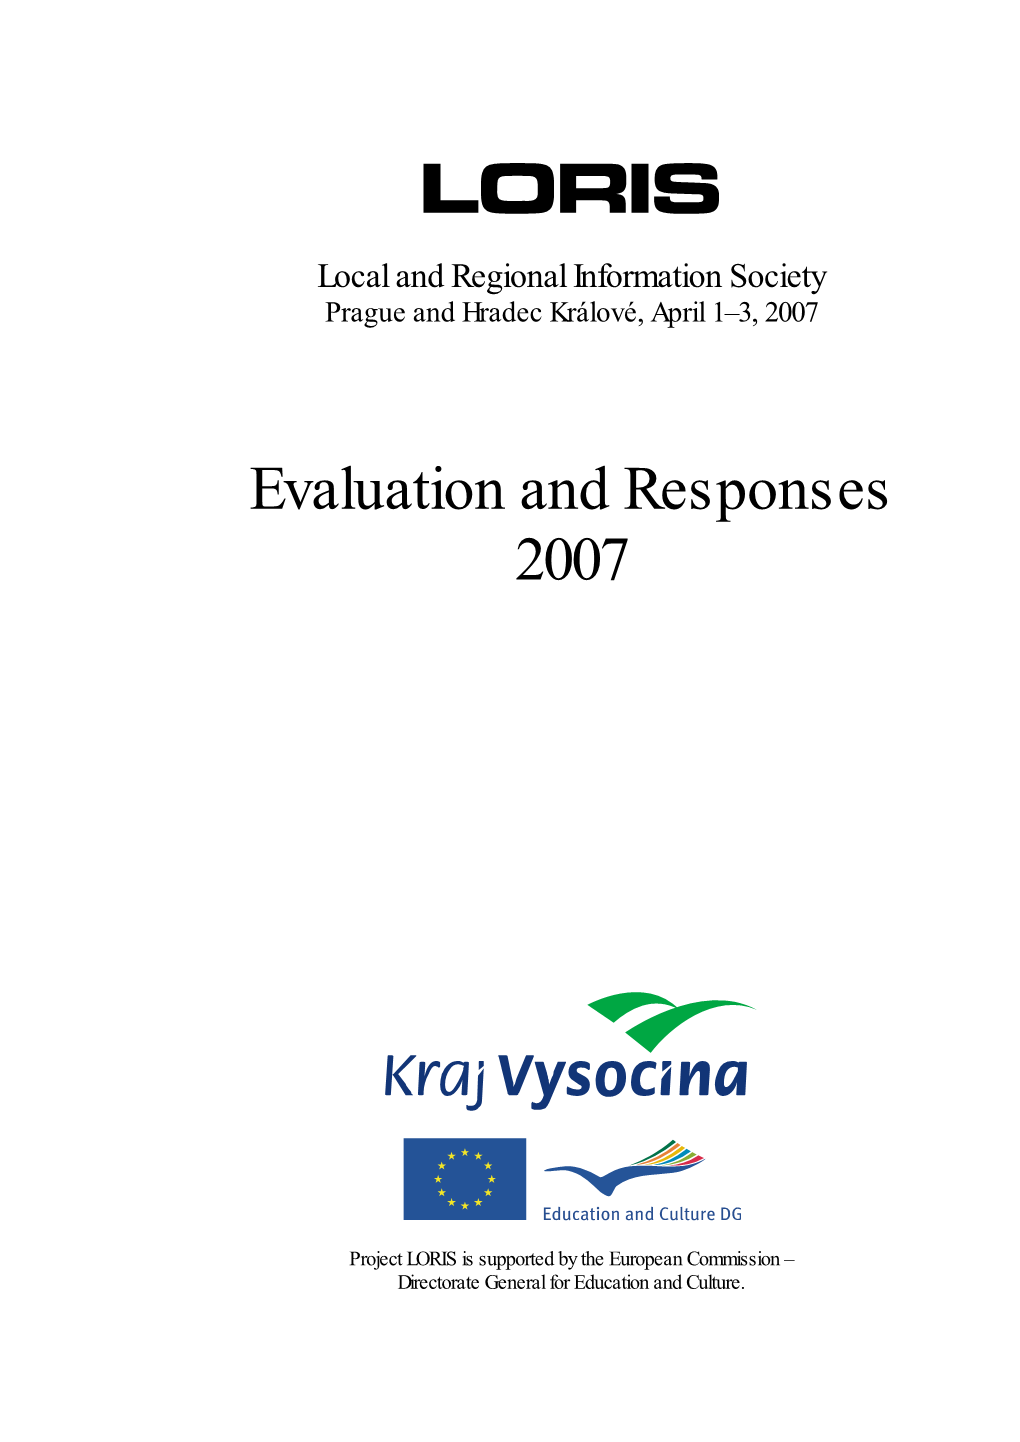 Evaluation and Responses 2007